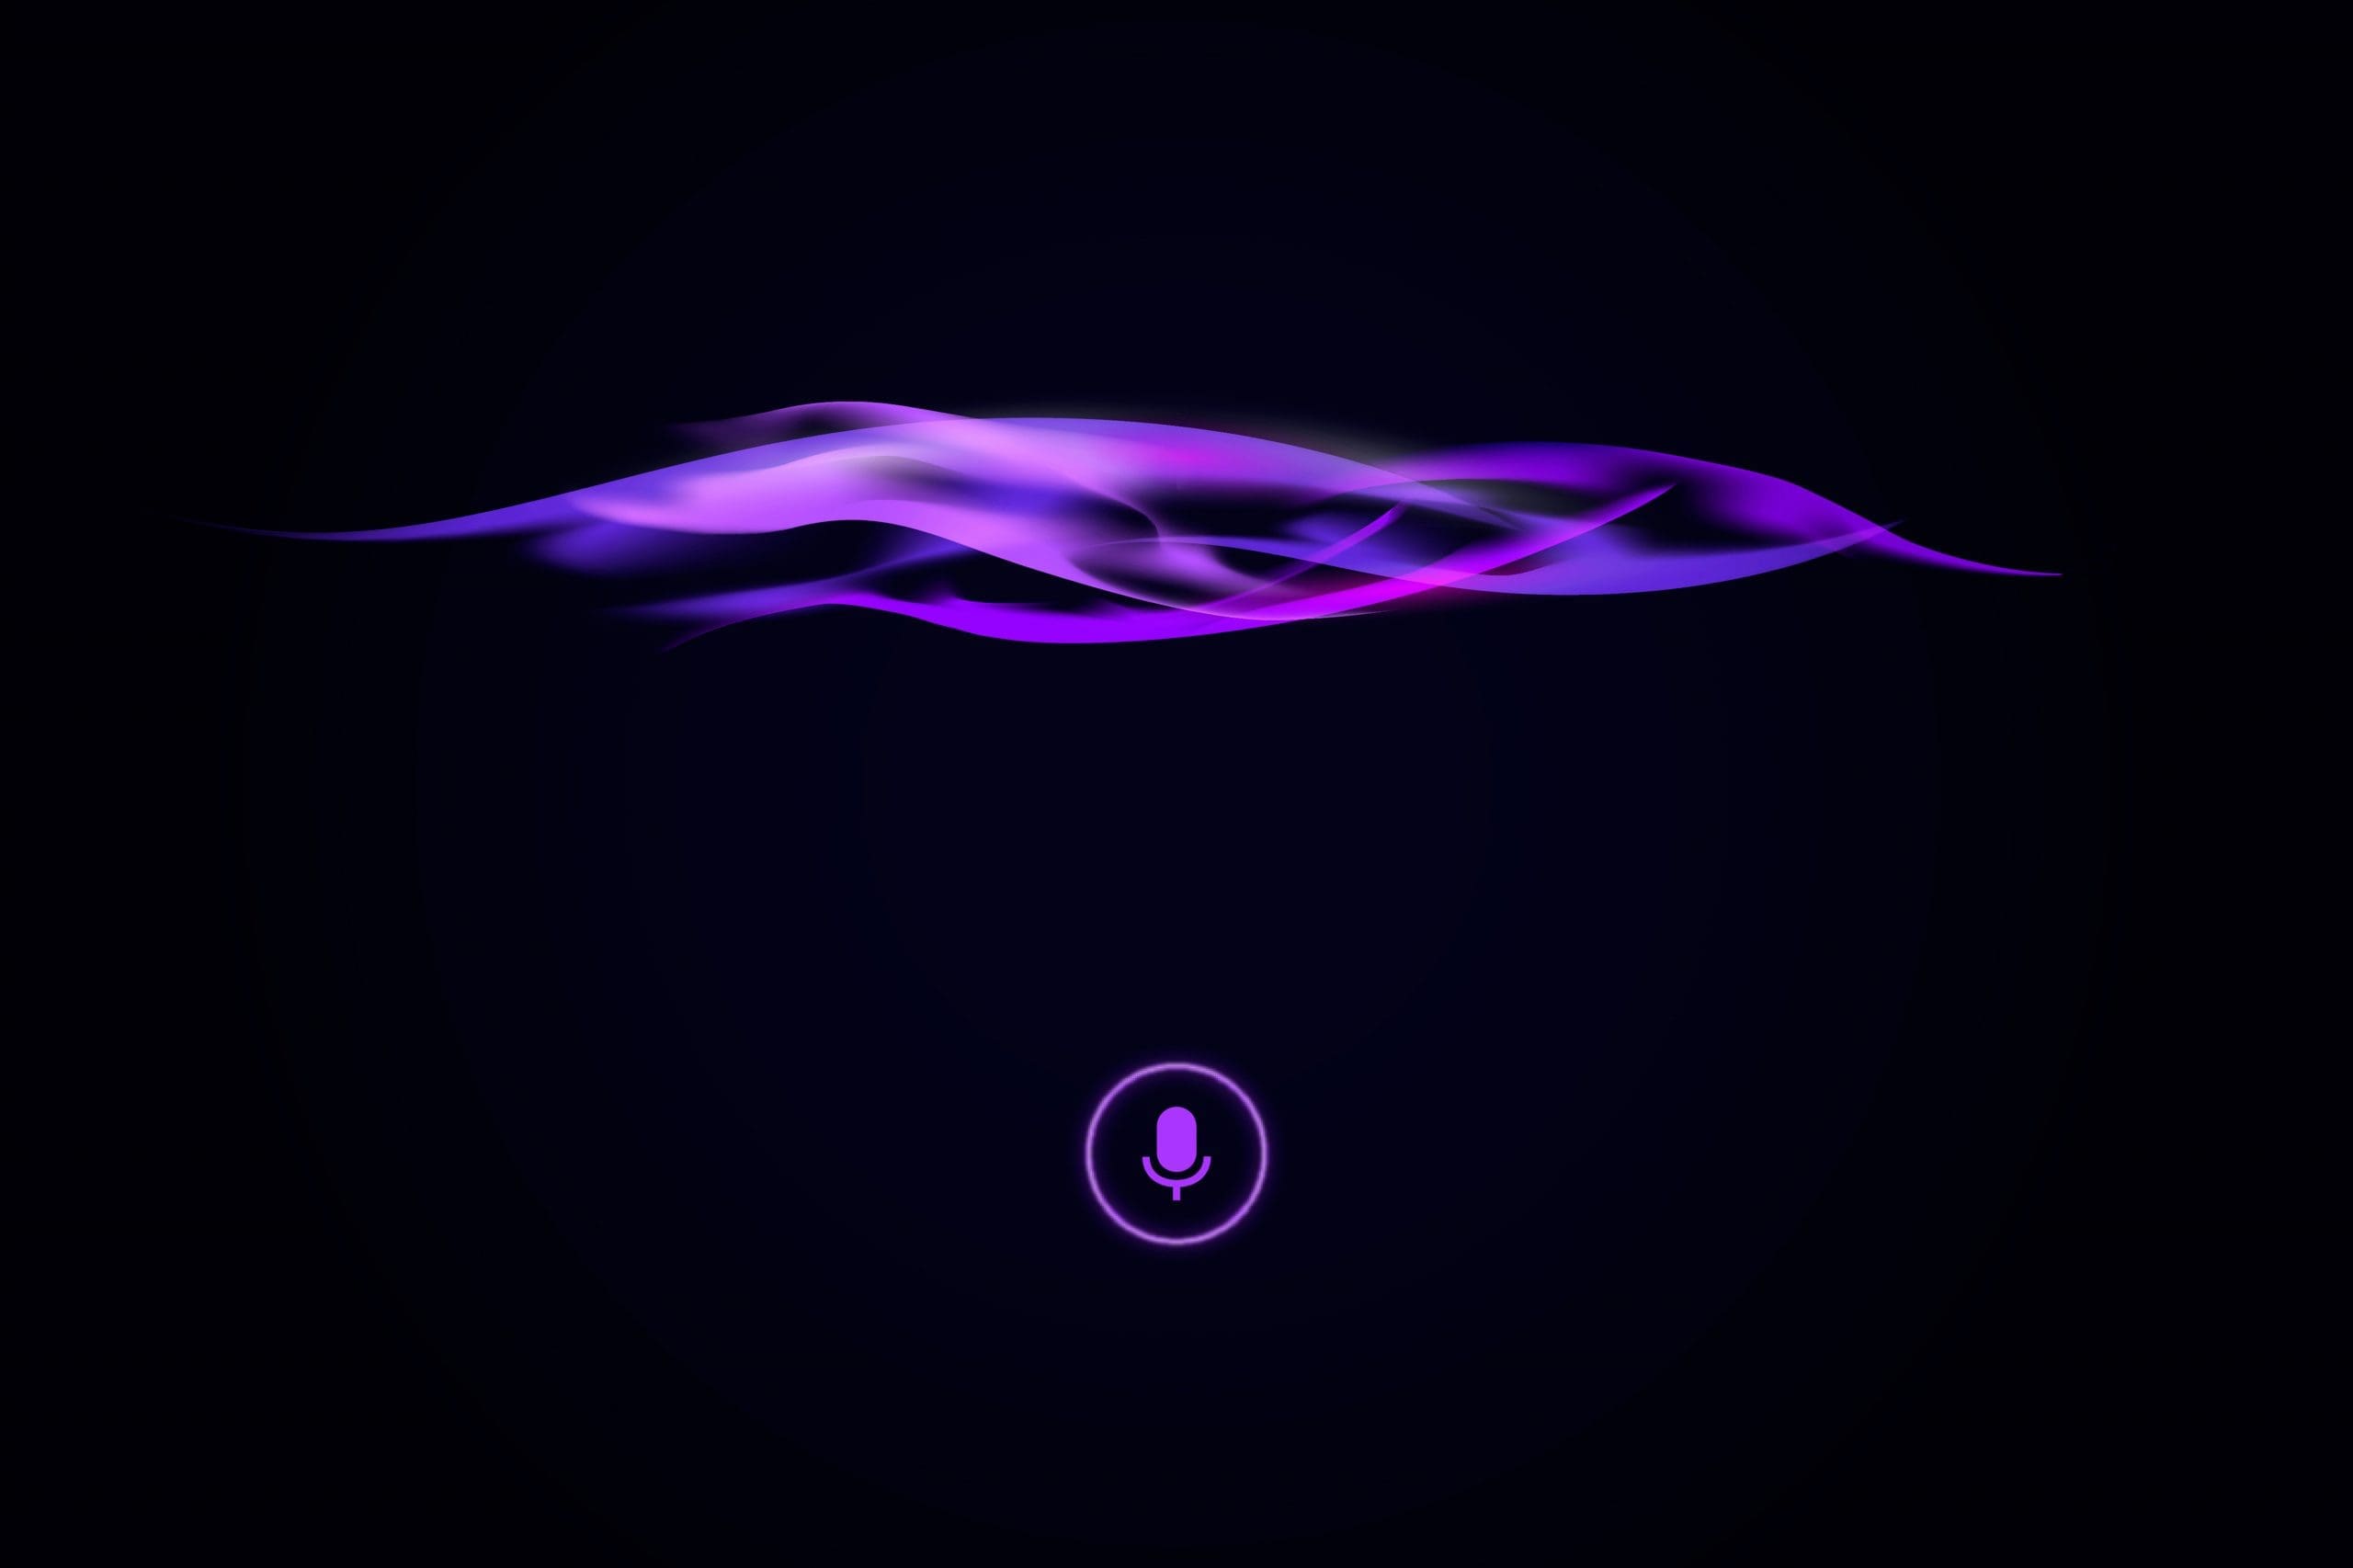 An image of a purple wave on a black background.